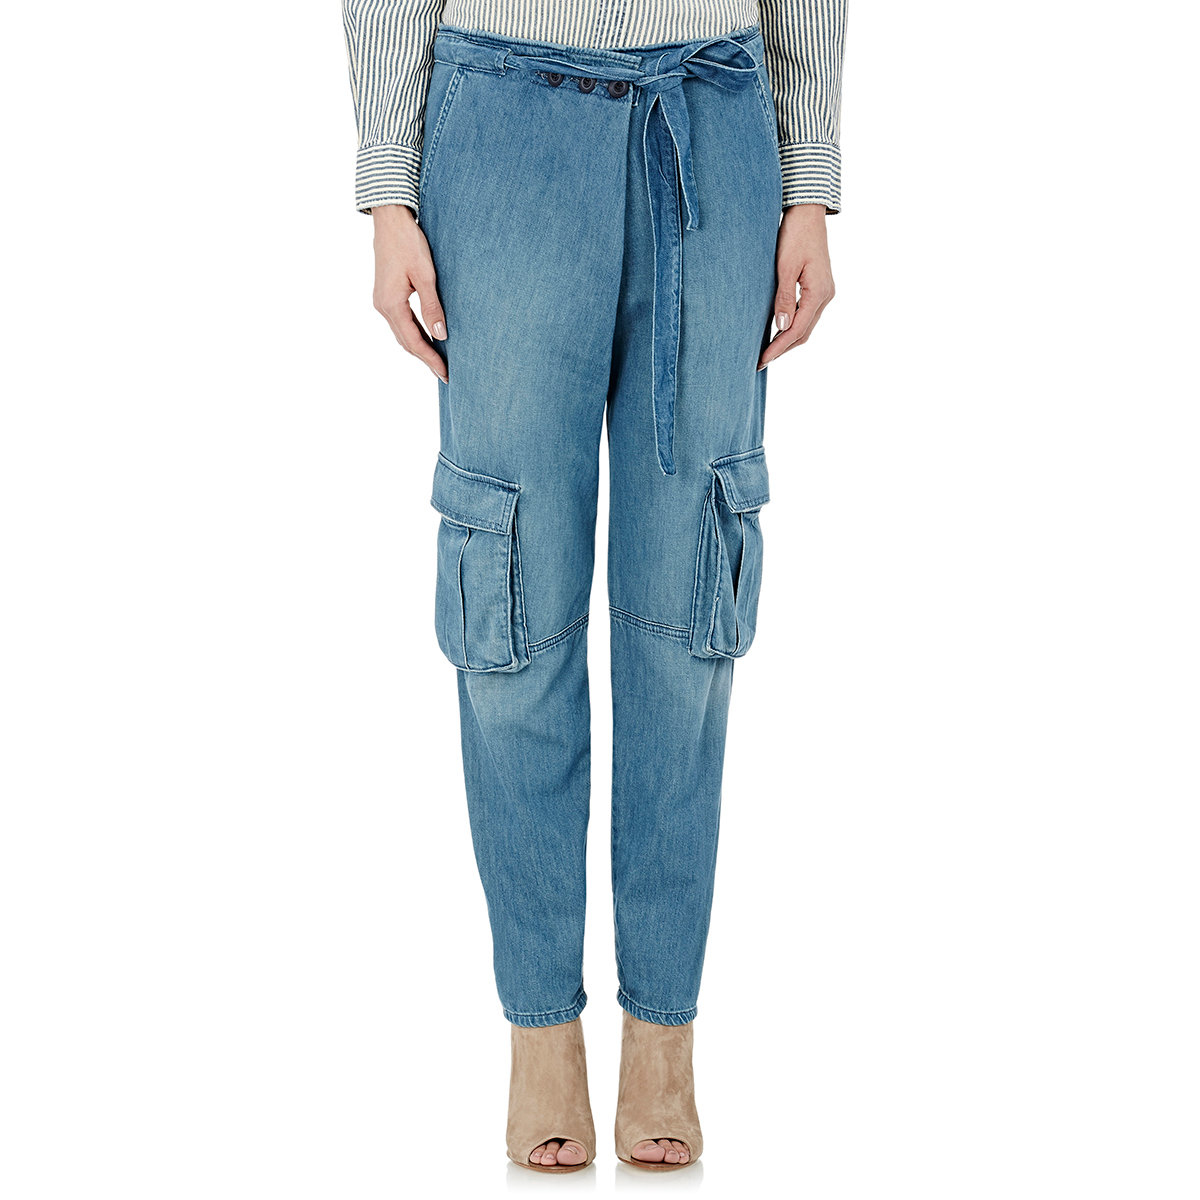 madewell crossover jeans